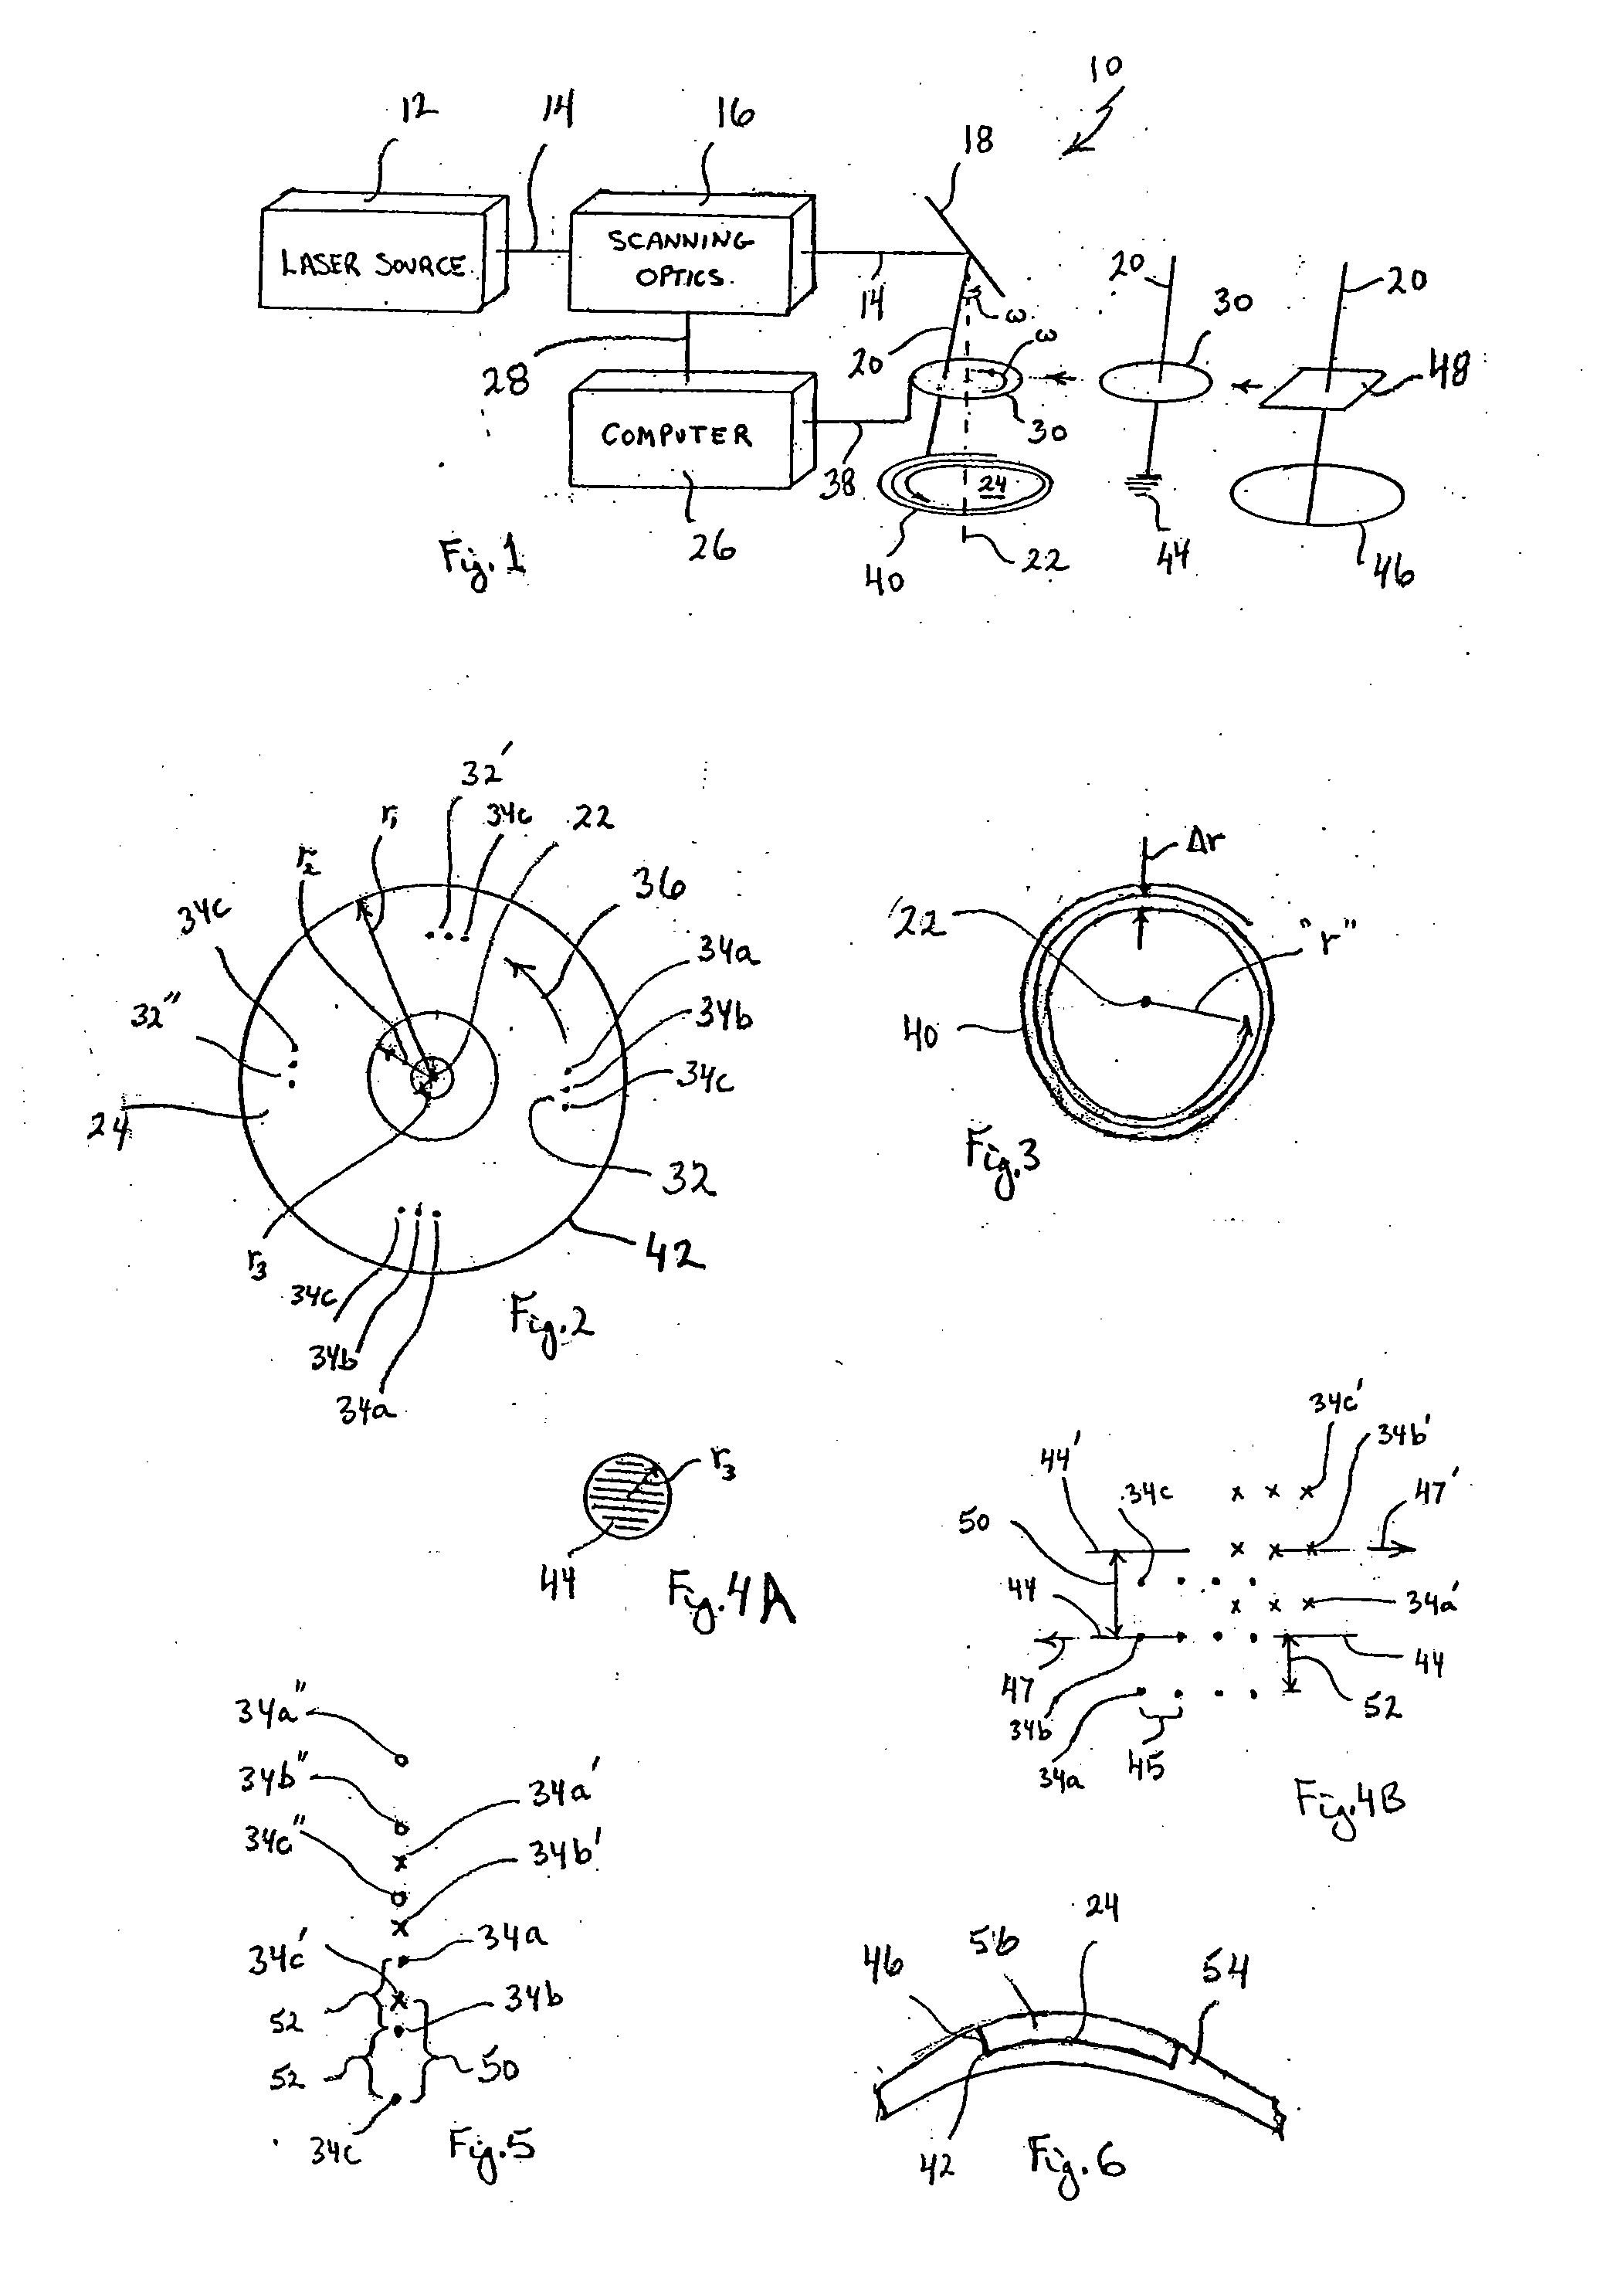 System and Method for Photoablation Using Multiple Focal Points with Rotating Beam Splitter